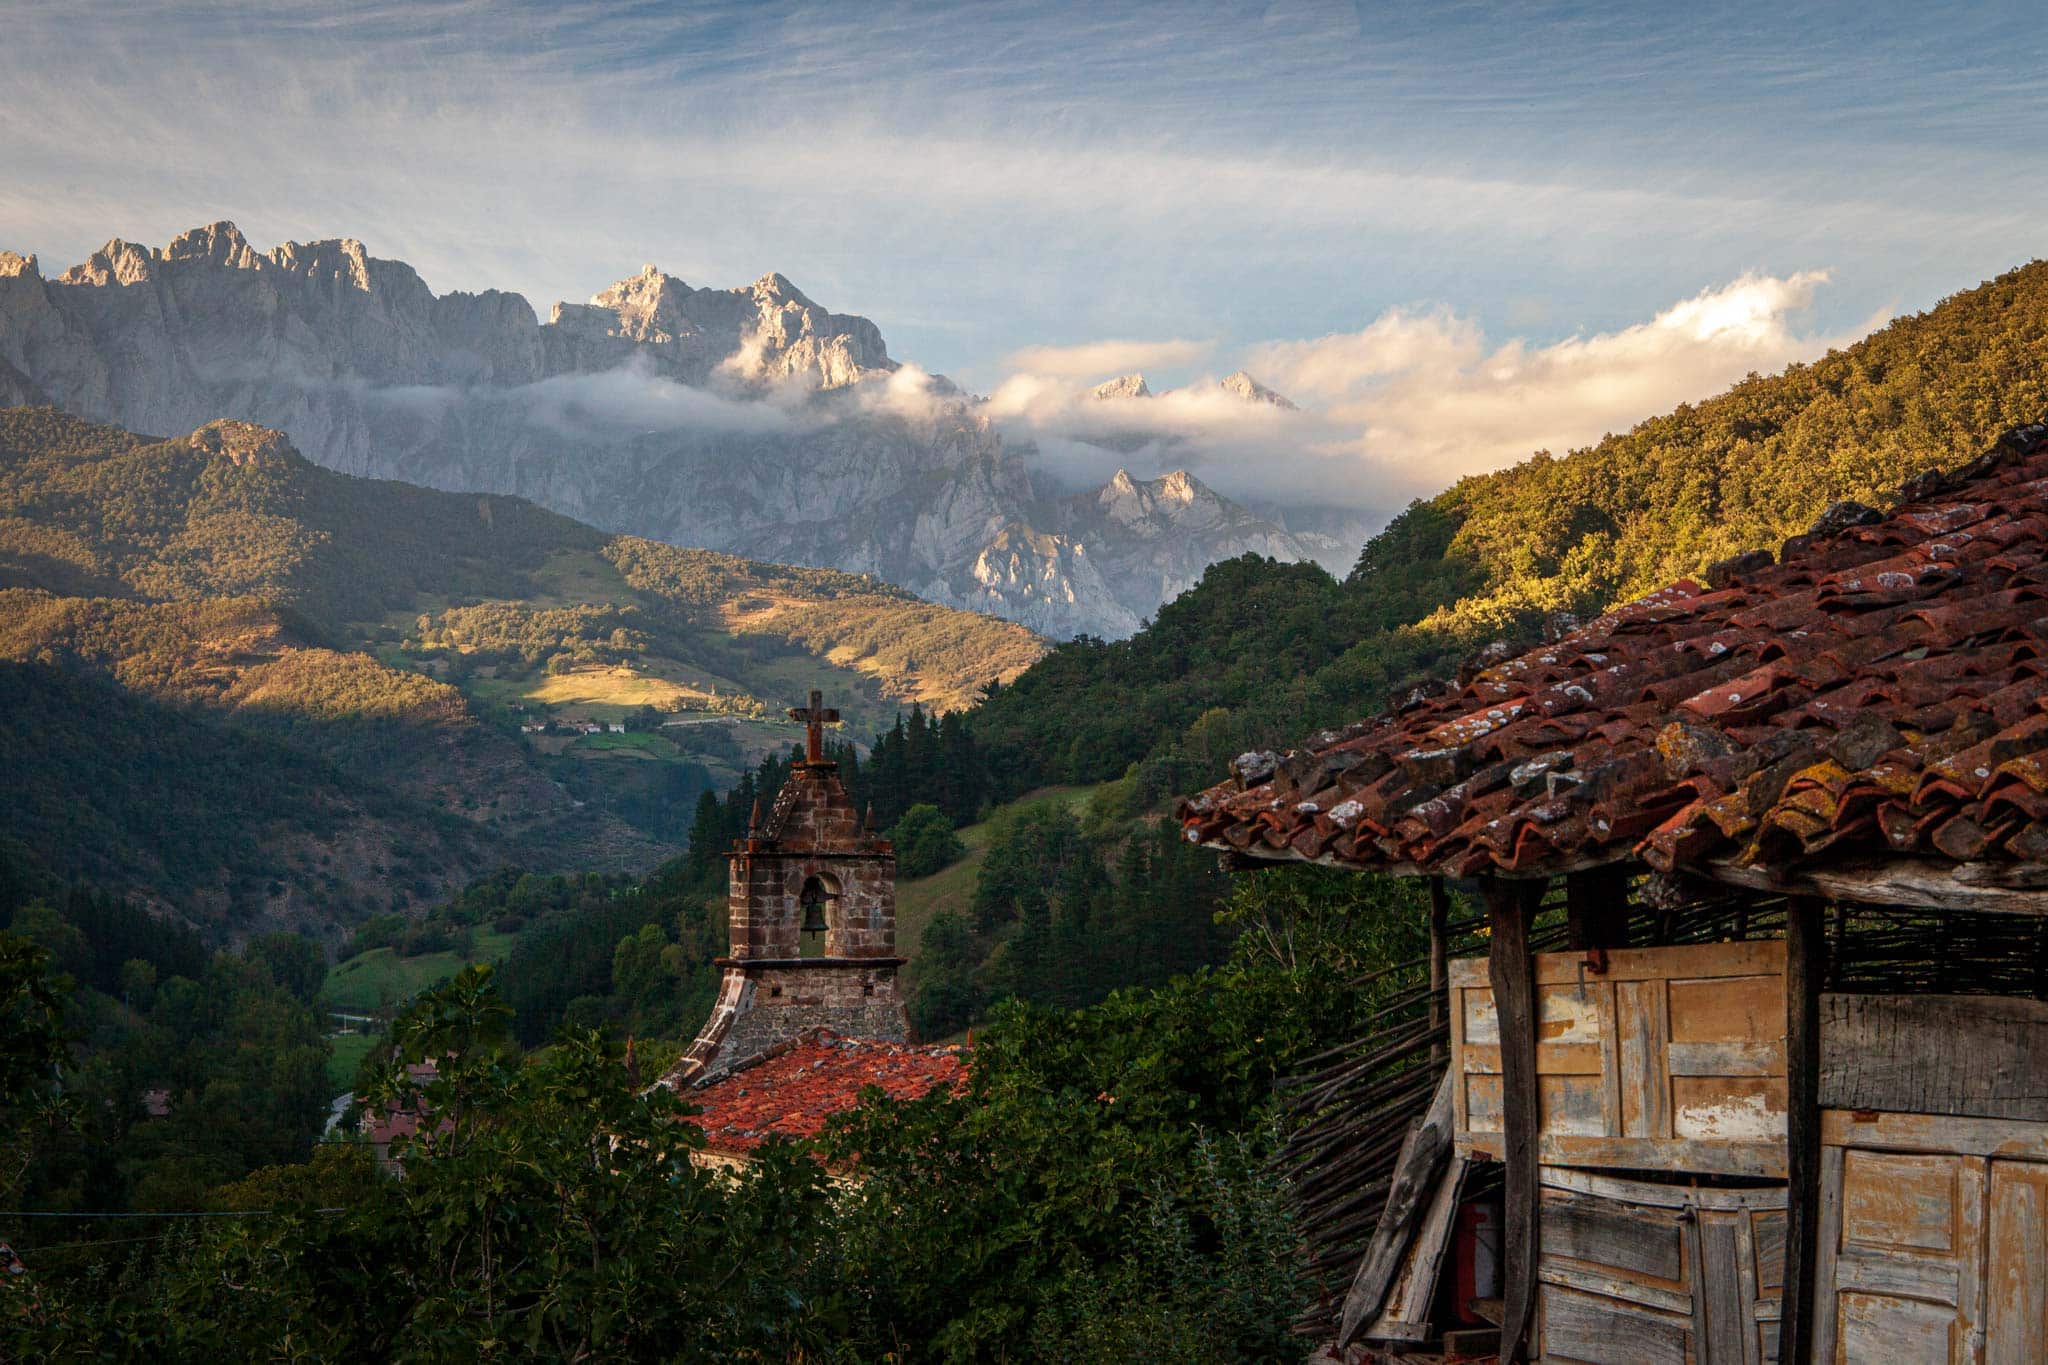 The mountains of Picos de Europa at sunset with an old stone house in the foreground